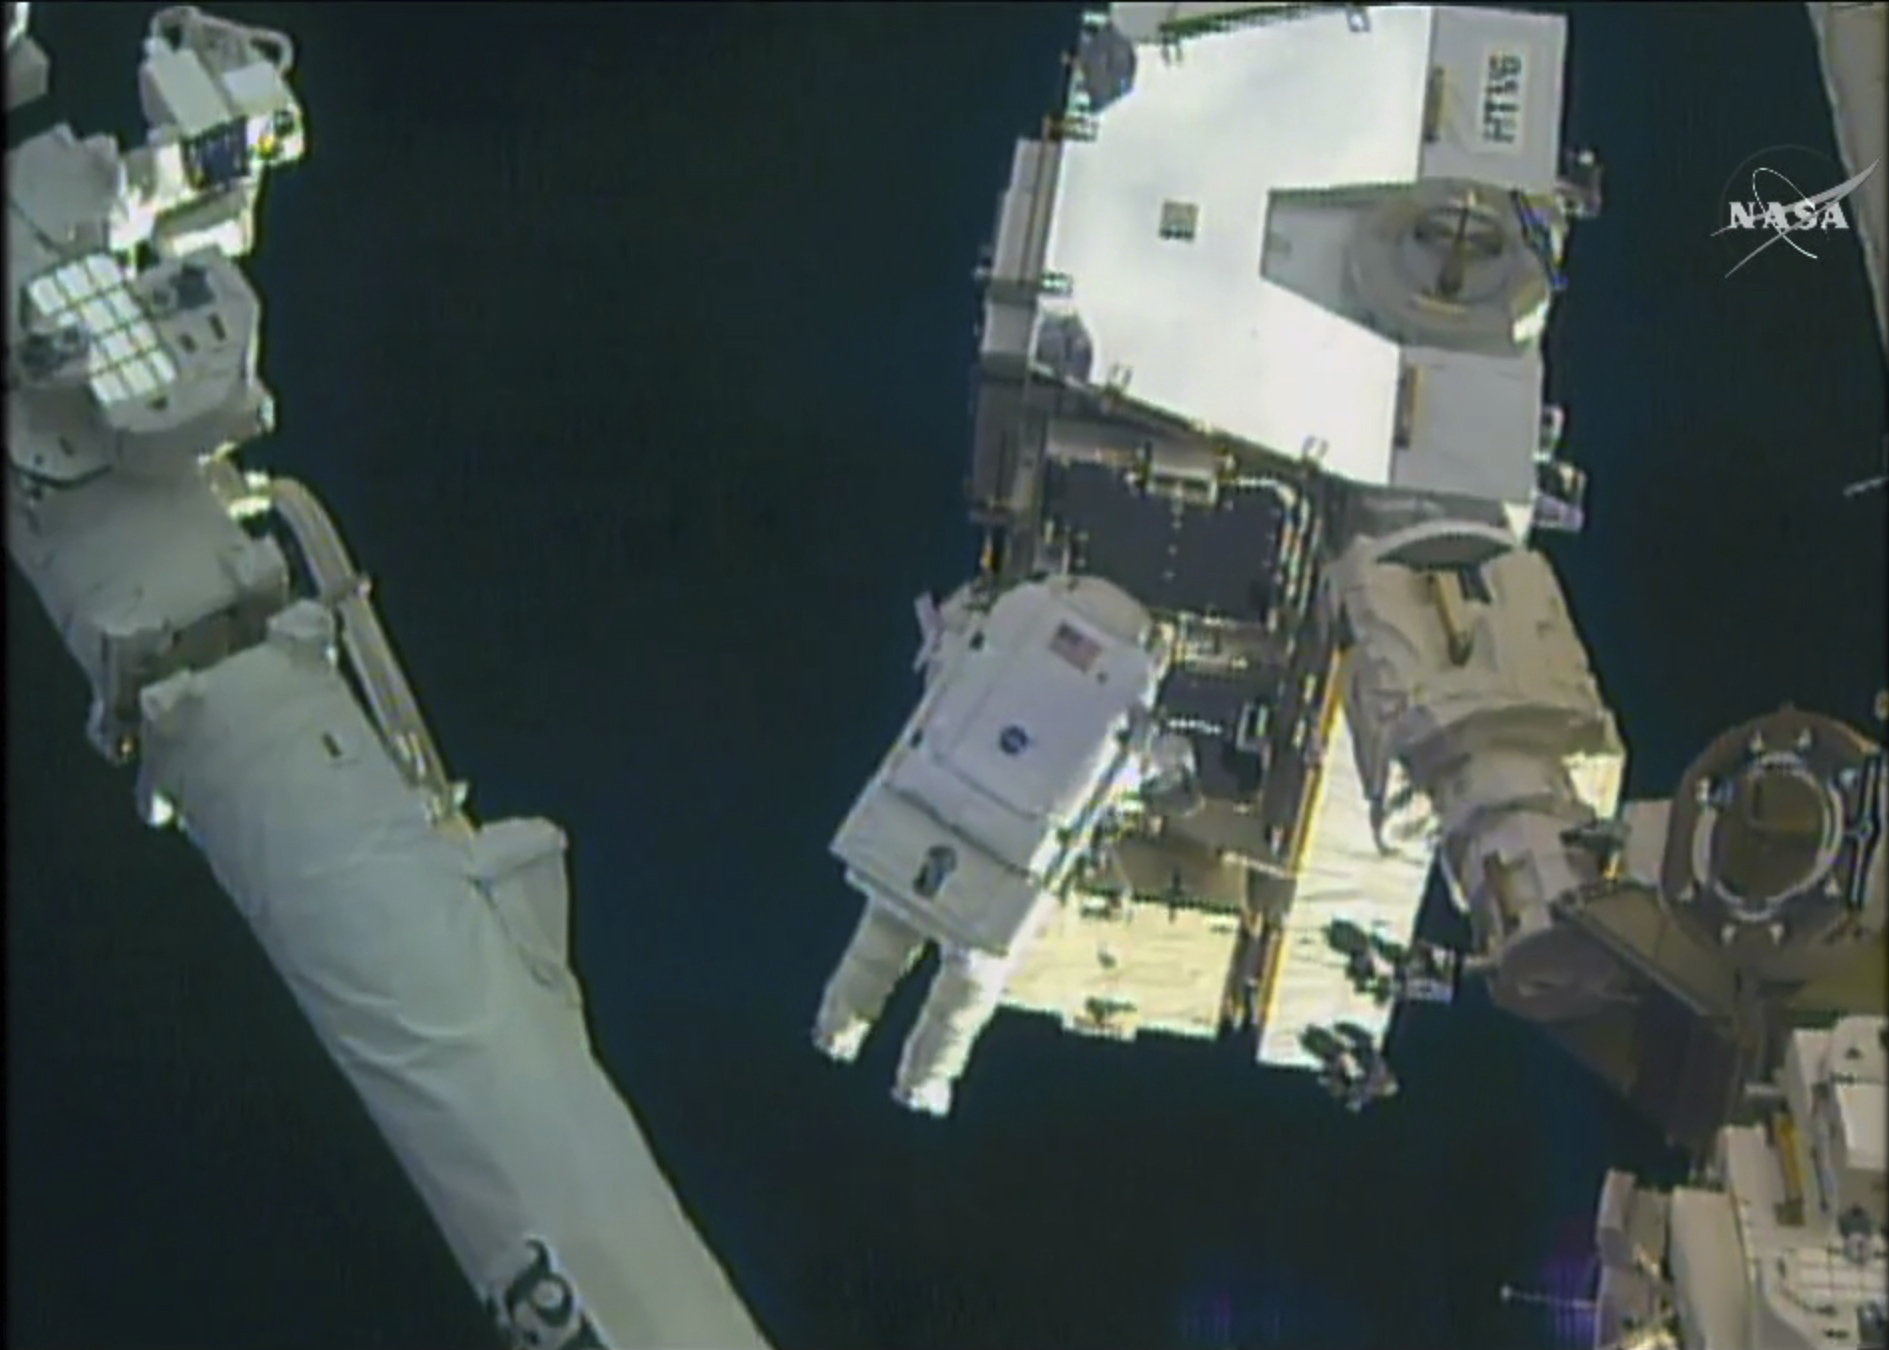 In this still image taken from video provided by NASA, astronaut Peggy Whitson takes a spacewalk outside the International Space Station on Friday, Jan. 6, 2016. Whitson and Commander Shane Kimbrough went spacewalking to hook up fancy new batteries on the International Space Station's sprawling power grid. (NASA via AP)